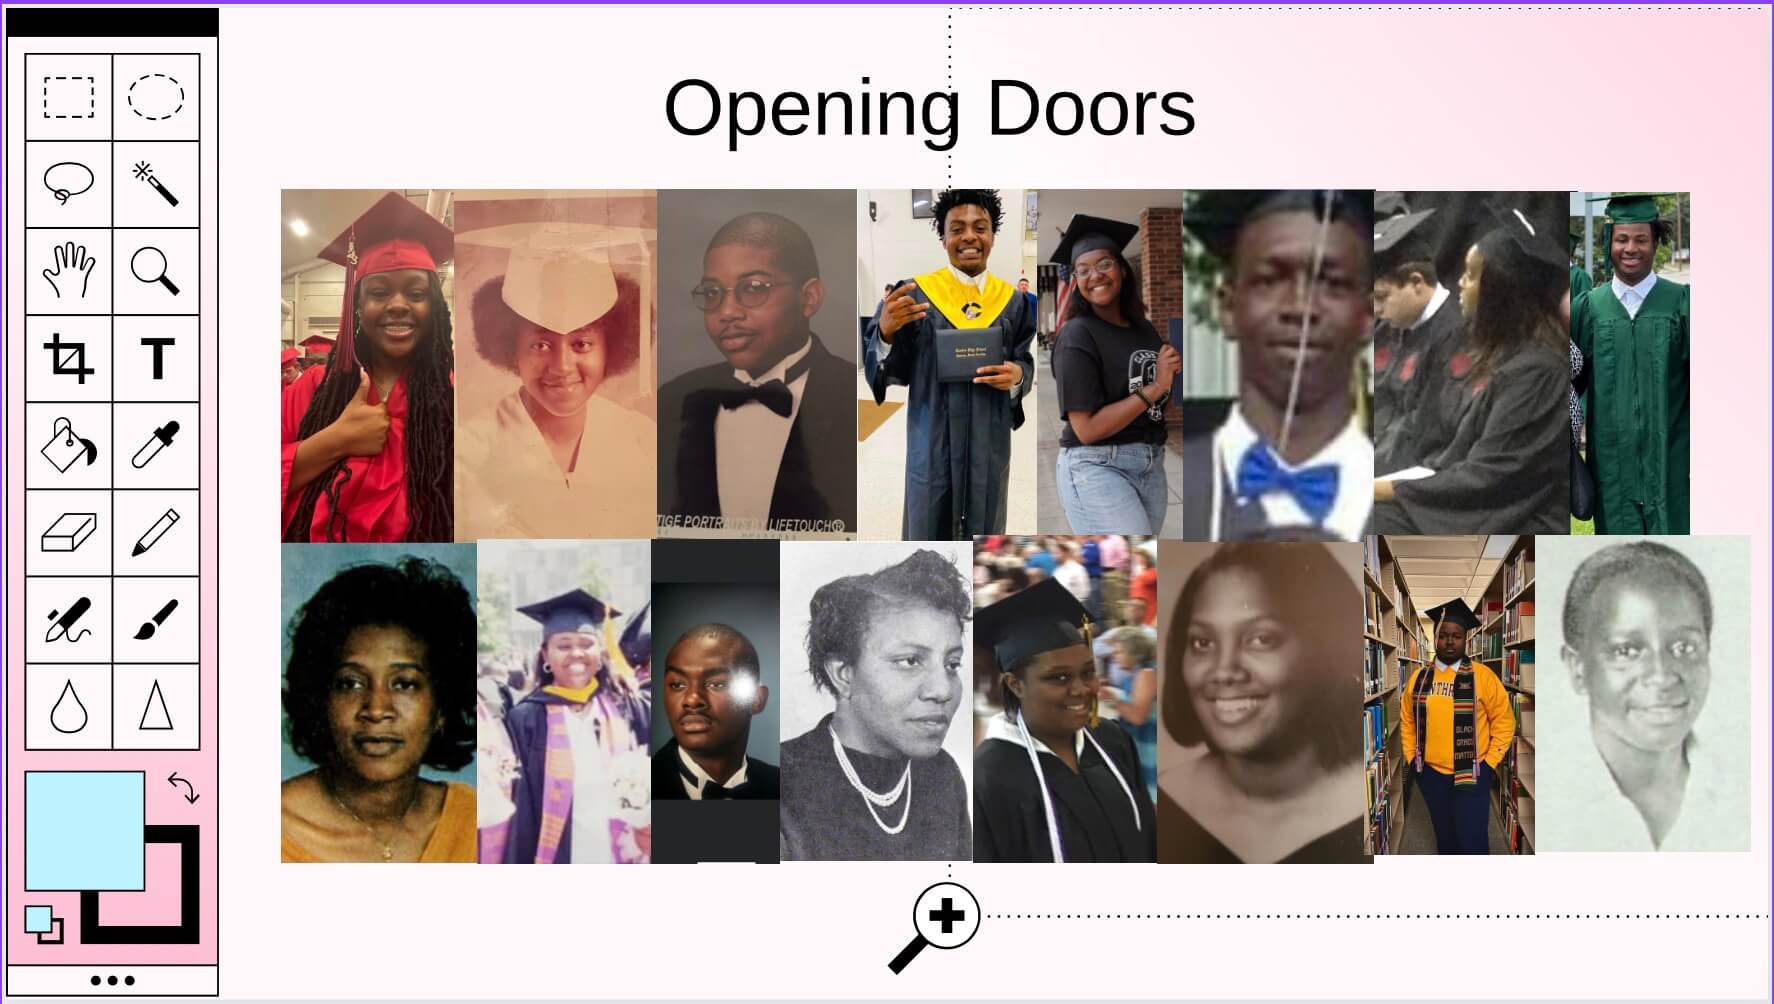 The image is a collage of graduation pictures showing diverse people in caps and gowns, with the title "Opening Doors" suggesting achievement and opportunity.